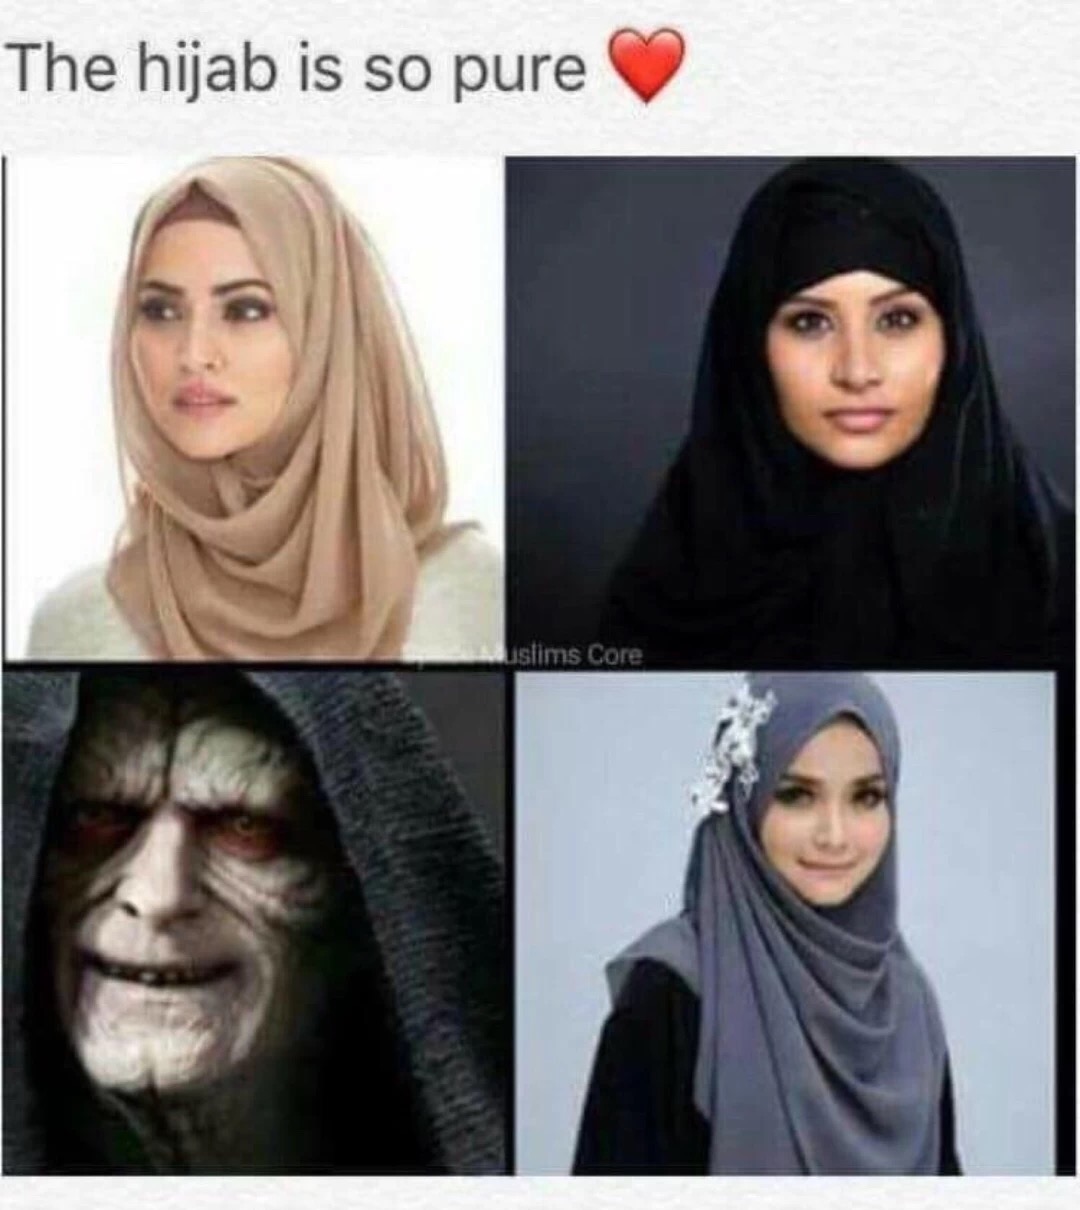 Brutal meme about hijab being object of purity.